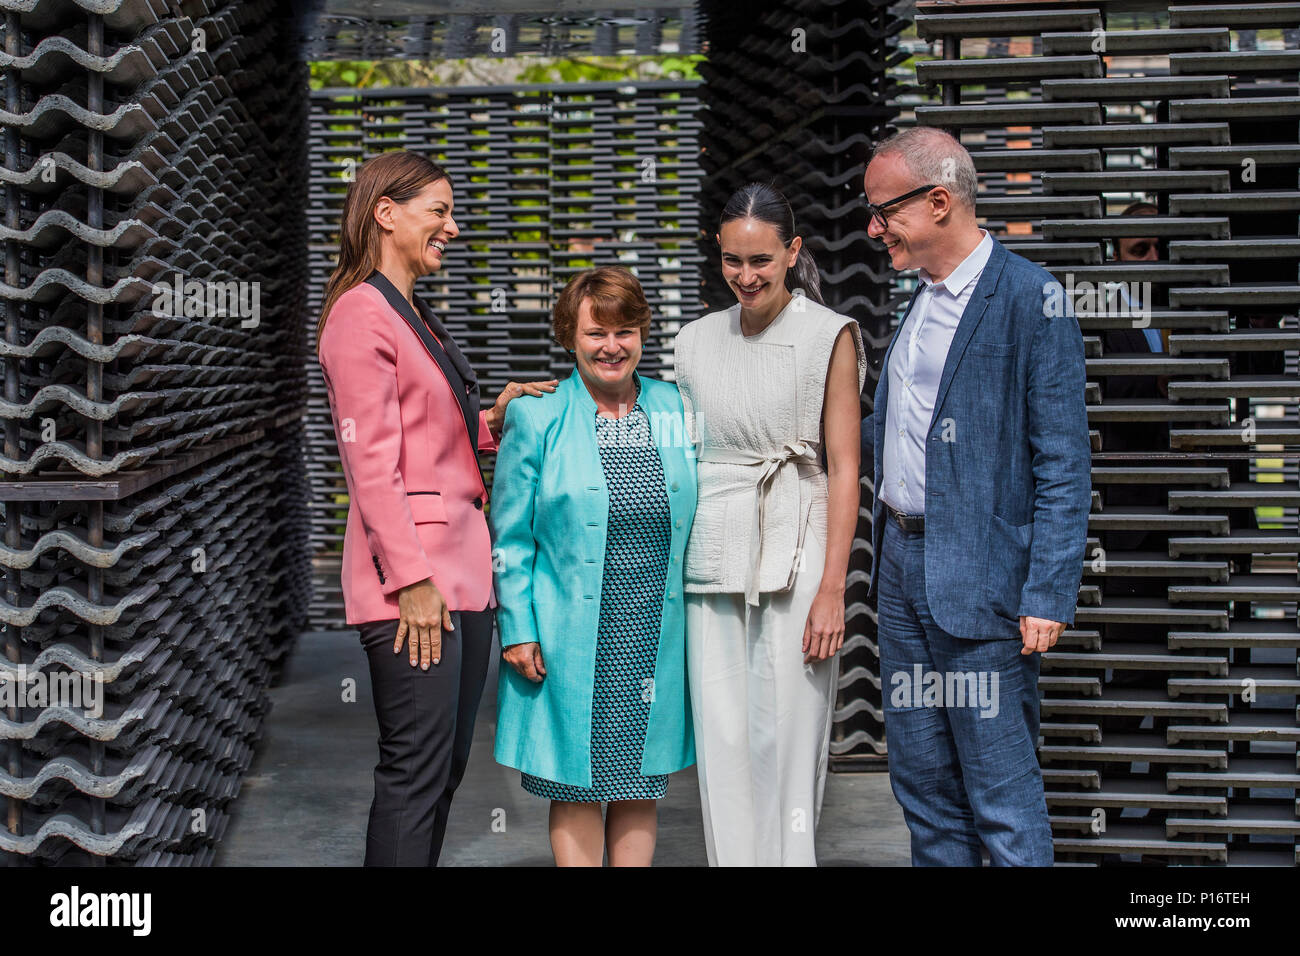 London, UK. 11th June 2018. Yana peel, CEO Serpentine Gallery, Sally Boyle, Goldman Sachs,Frida Escobedo, the architect,  Hans Ulrich,Obvist, artisitic Director Serpentine Galleries - Serpentine Pavilion 2018, designed by the Mexican architect Frida Escobedo. The courtyard-based design draws on both the domestic architecture of Mexico and British materials. It is alligned the Prime Meridian line at London’s Royal Observatory in Greenwich. Credit: Guy Bell/Alamy Live News Stock Photo